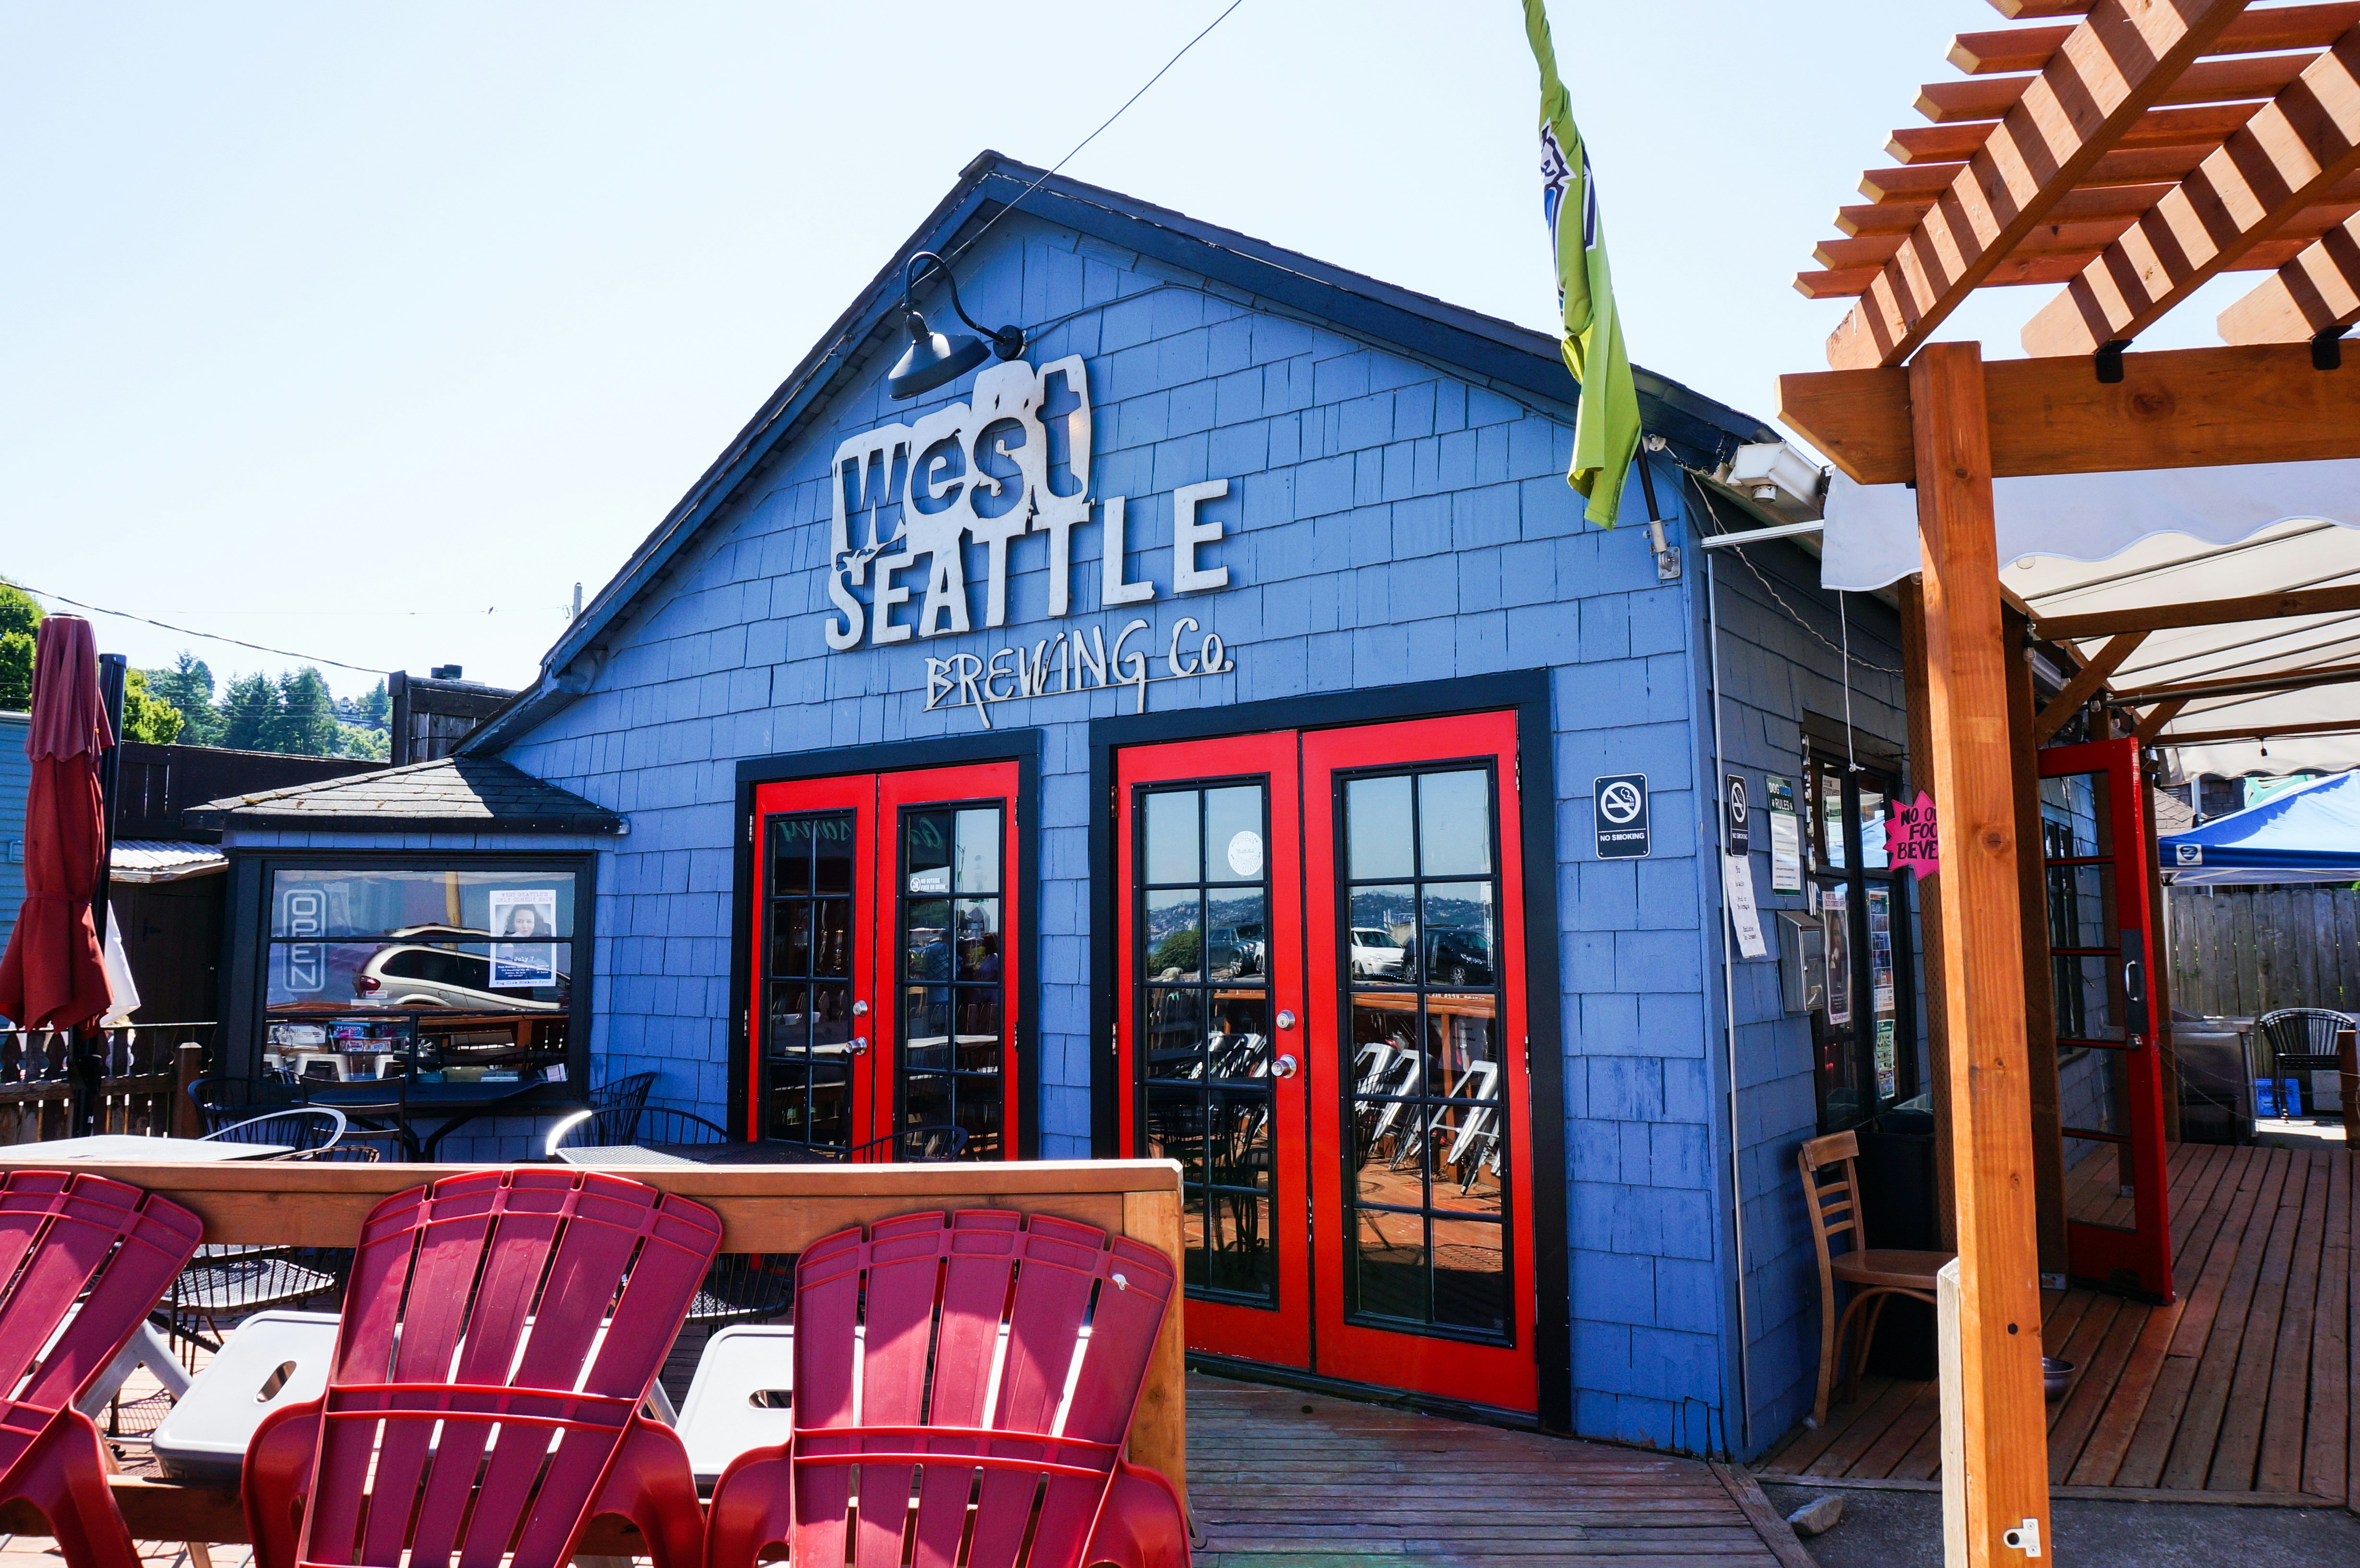 The West Seattle Brewing Company patio is the perfect place to watch the sunset over a pint © Valerie Stimac / Lonely Planet